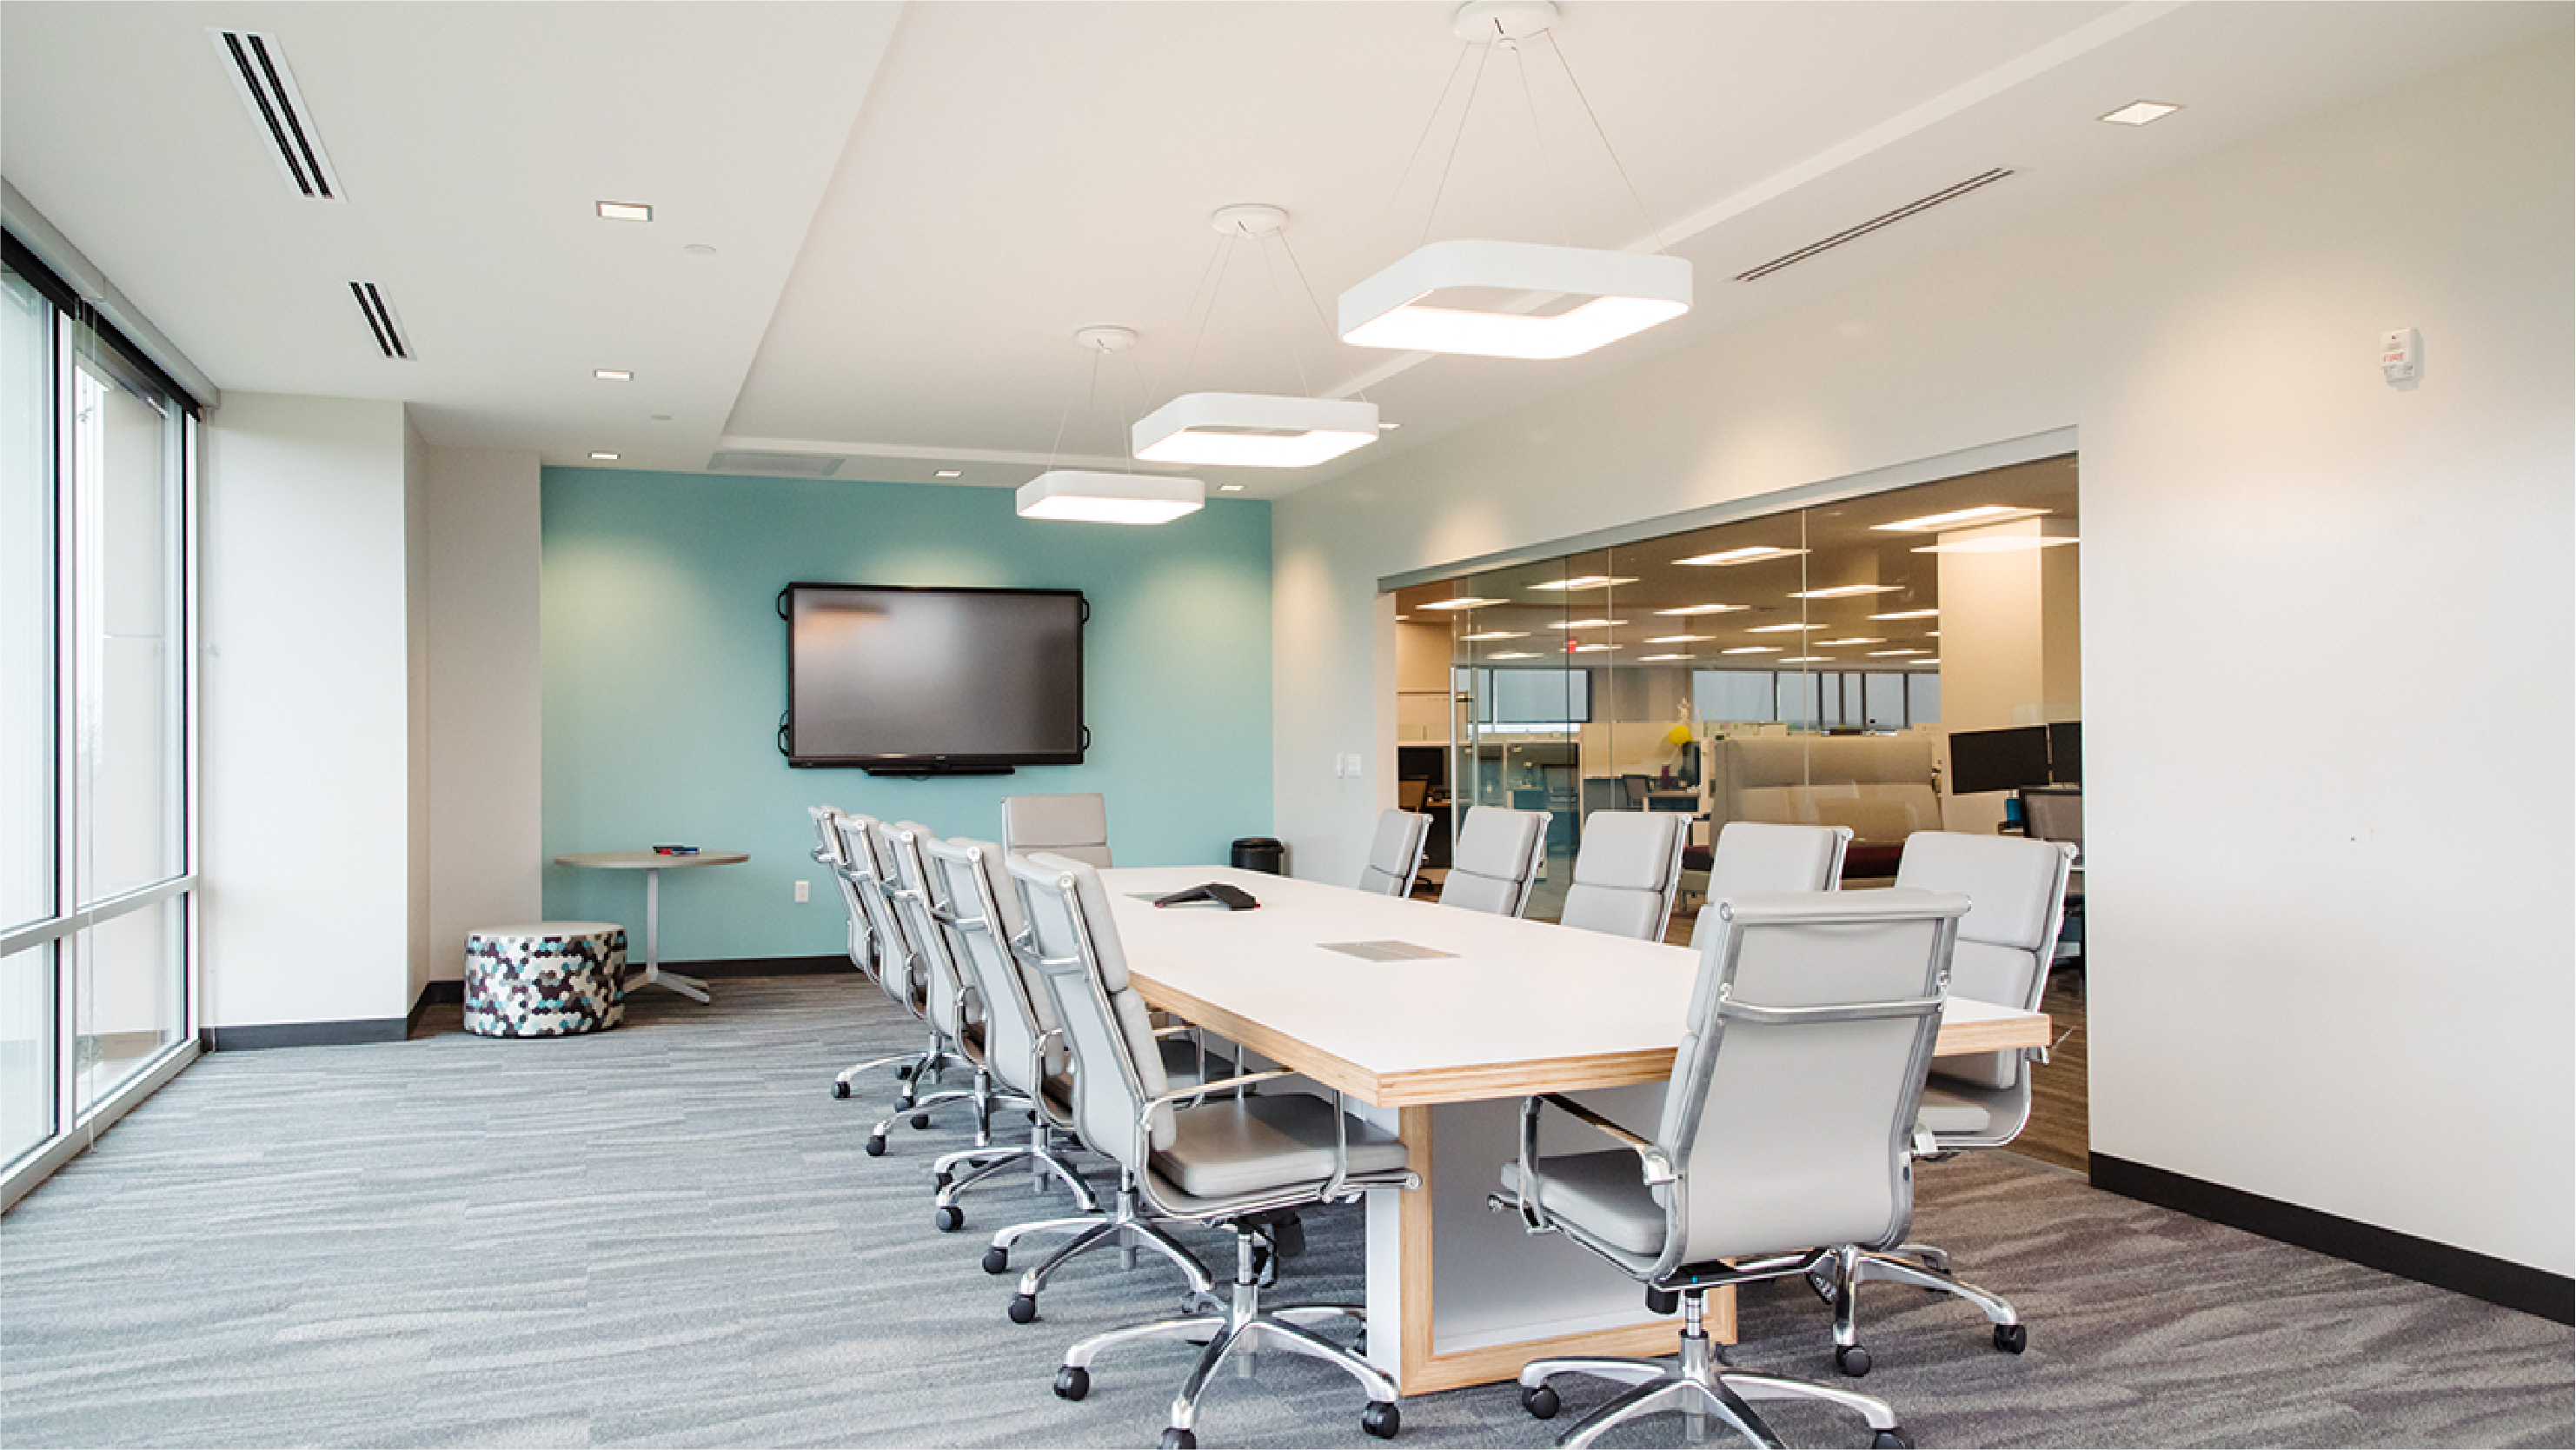 Conference room with modern light fixtures, gray chairs, white walls and a turquoise accent wall